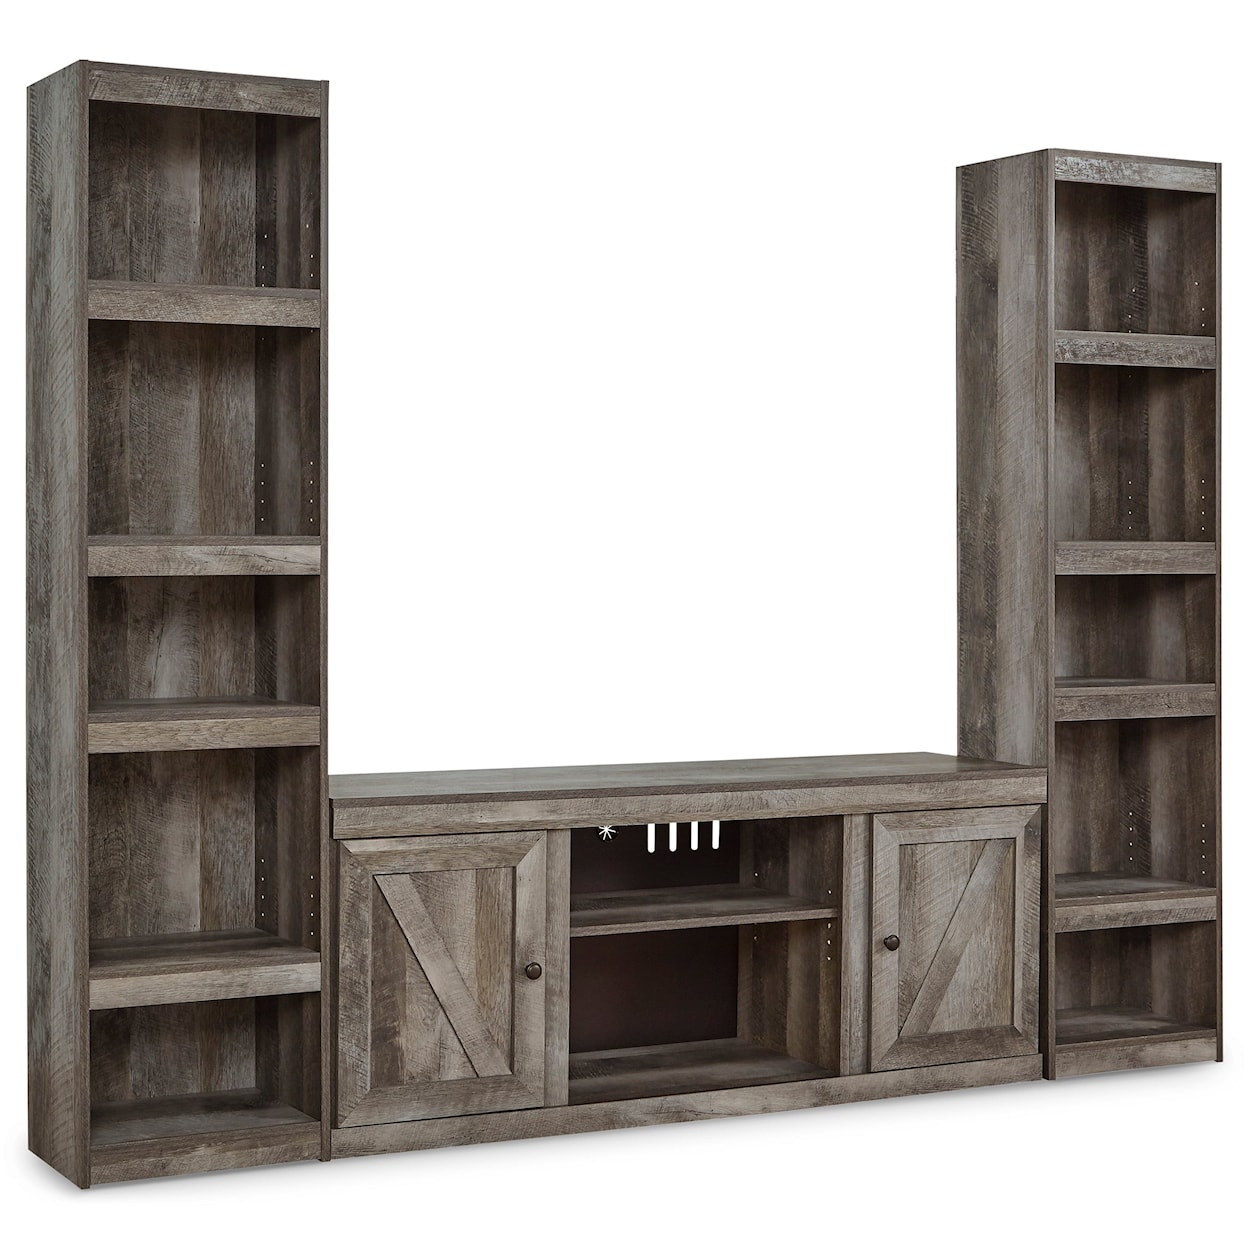 Signature Design by Ashley Wynnlow Entertainment Center with Piers